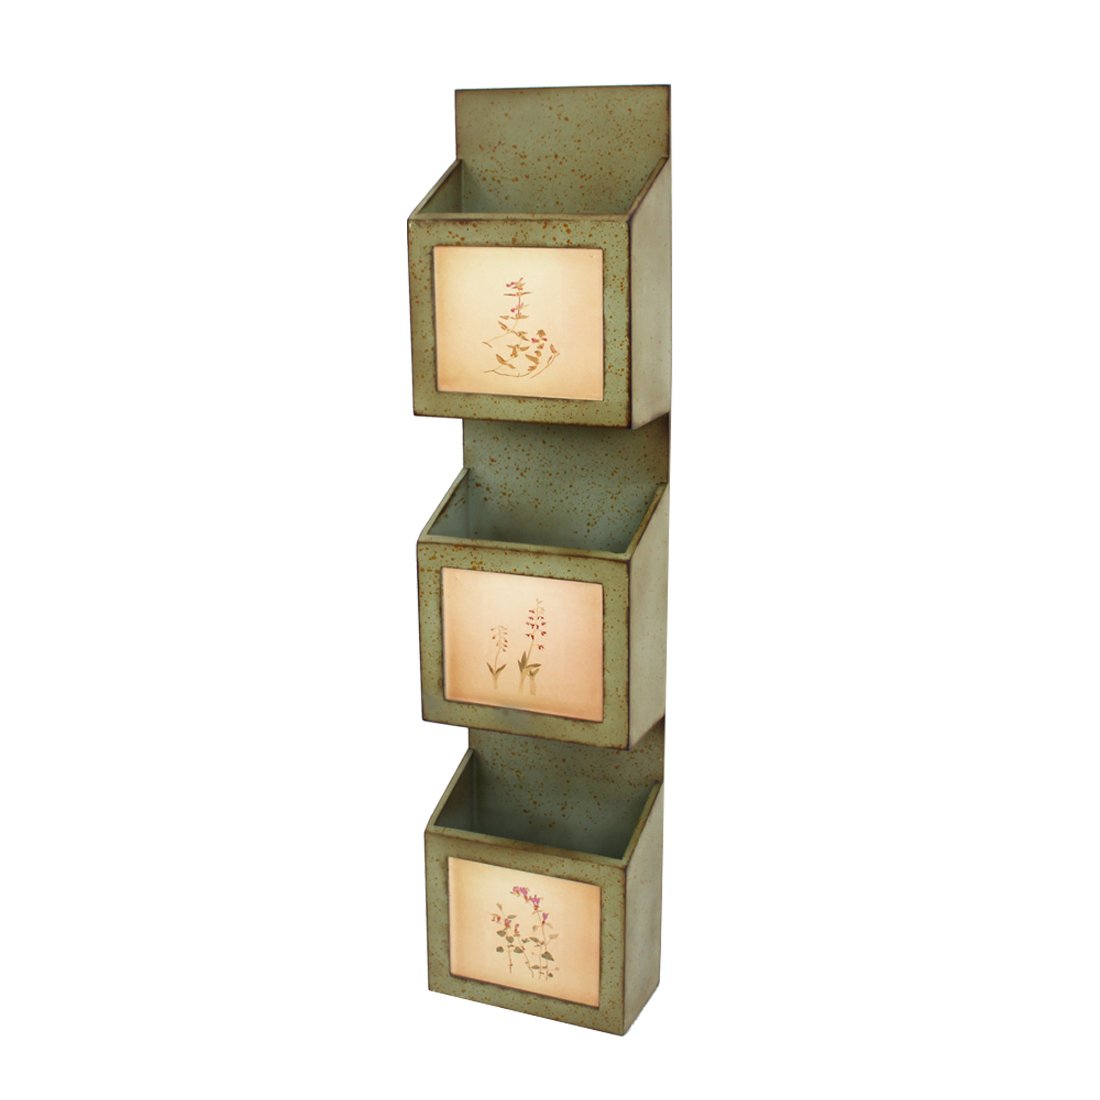 Rustic Wooden Wall Organizer With 3 Box Slots And Floral Pattern, Green- Saltoro Sherpi